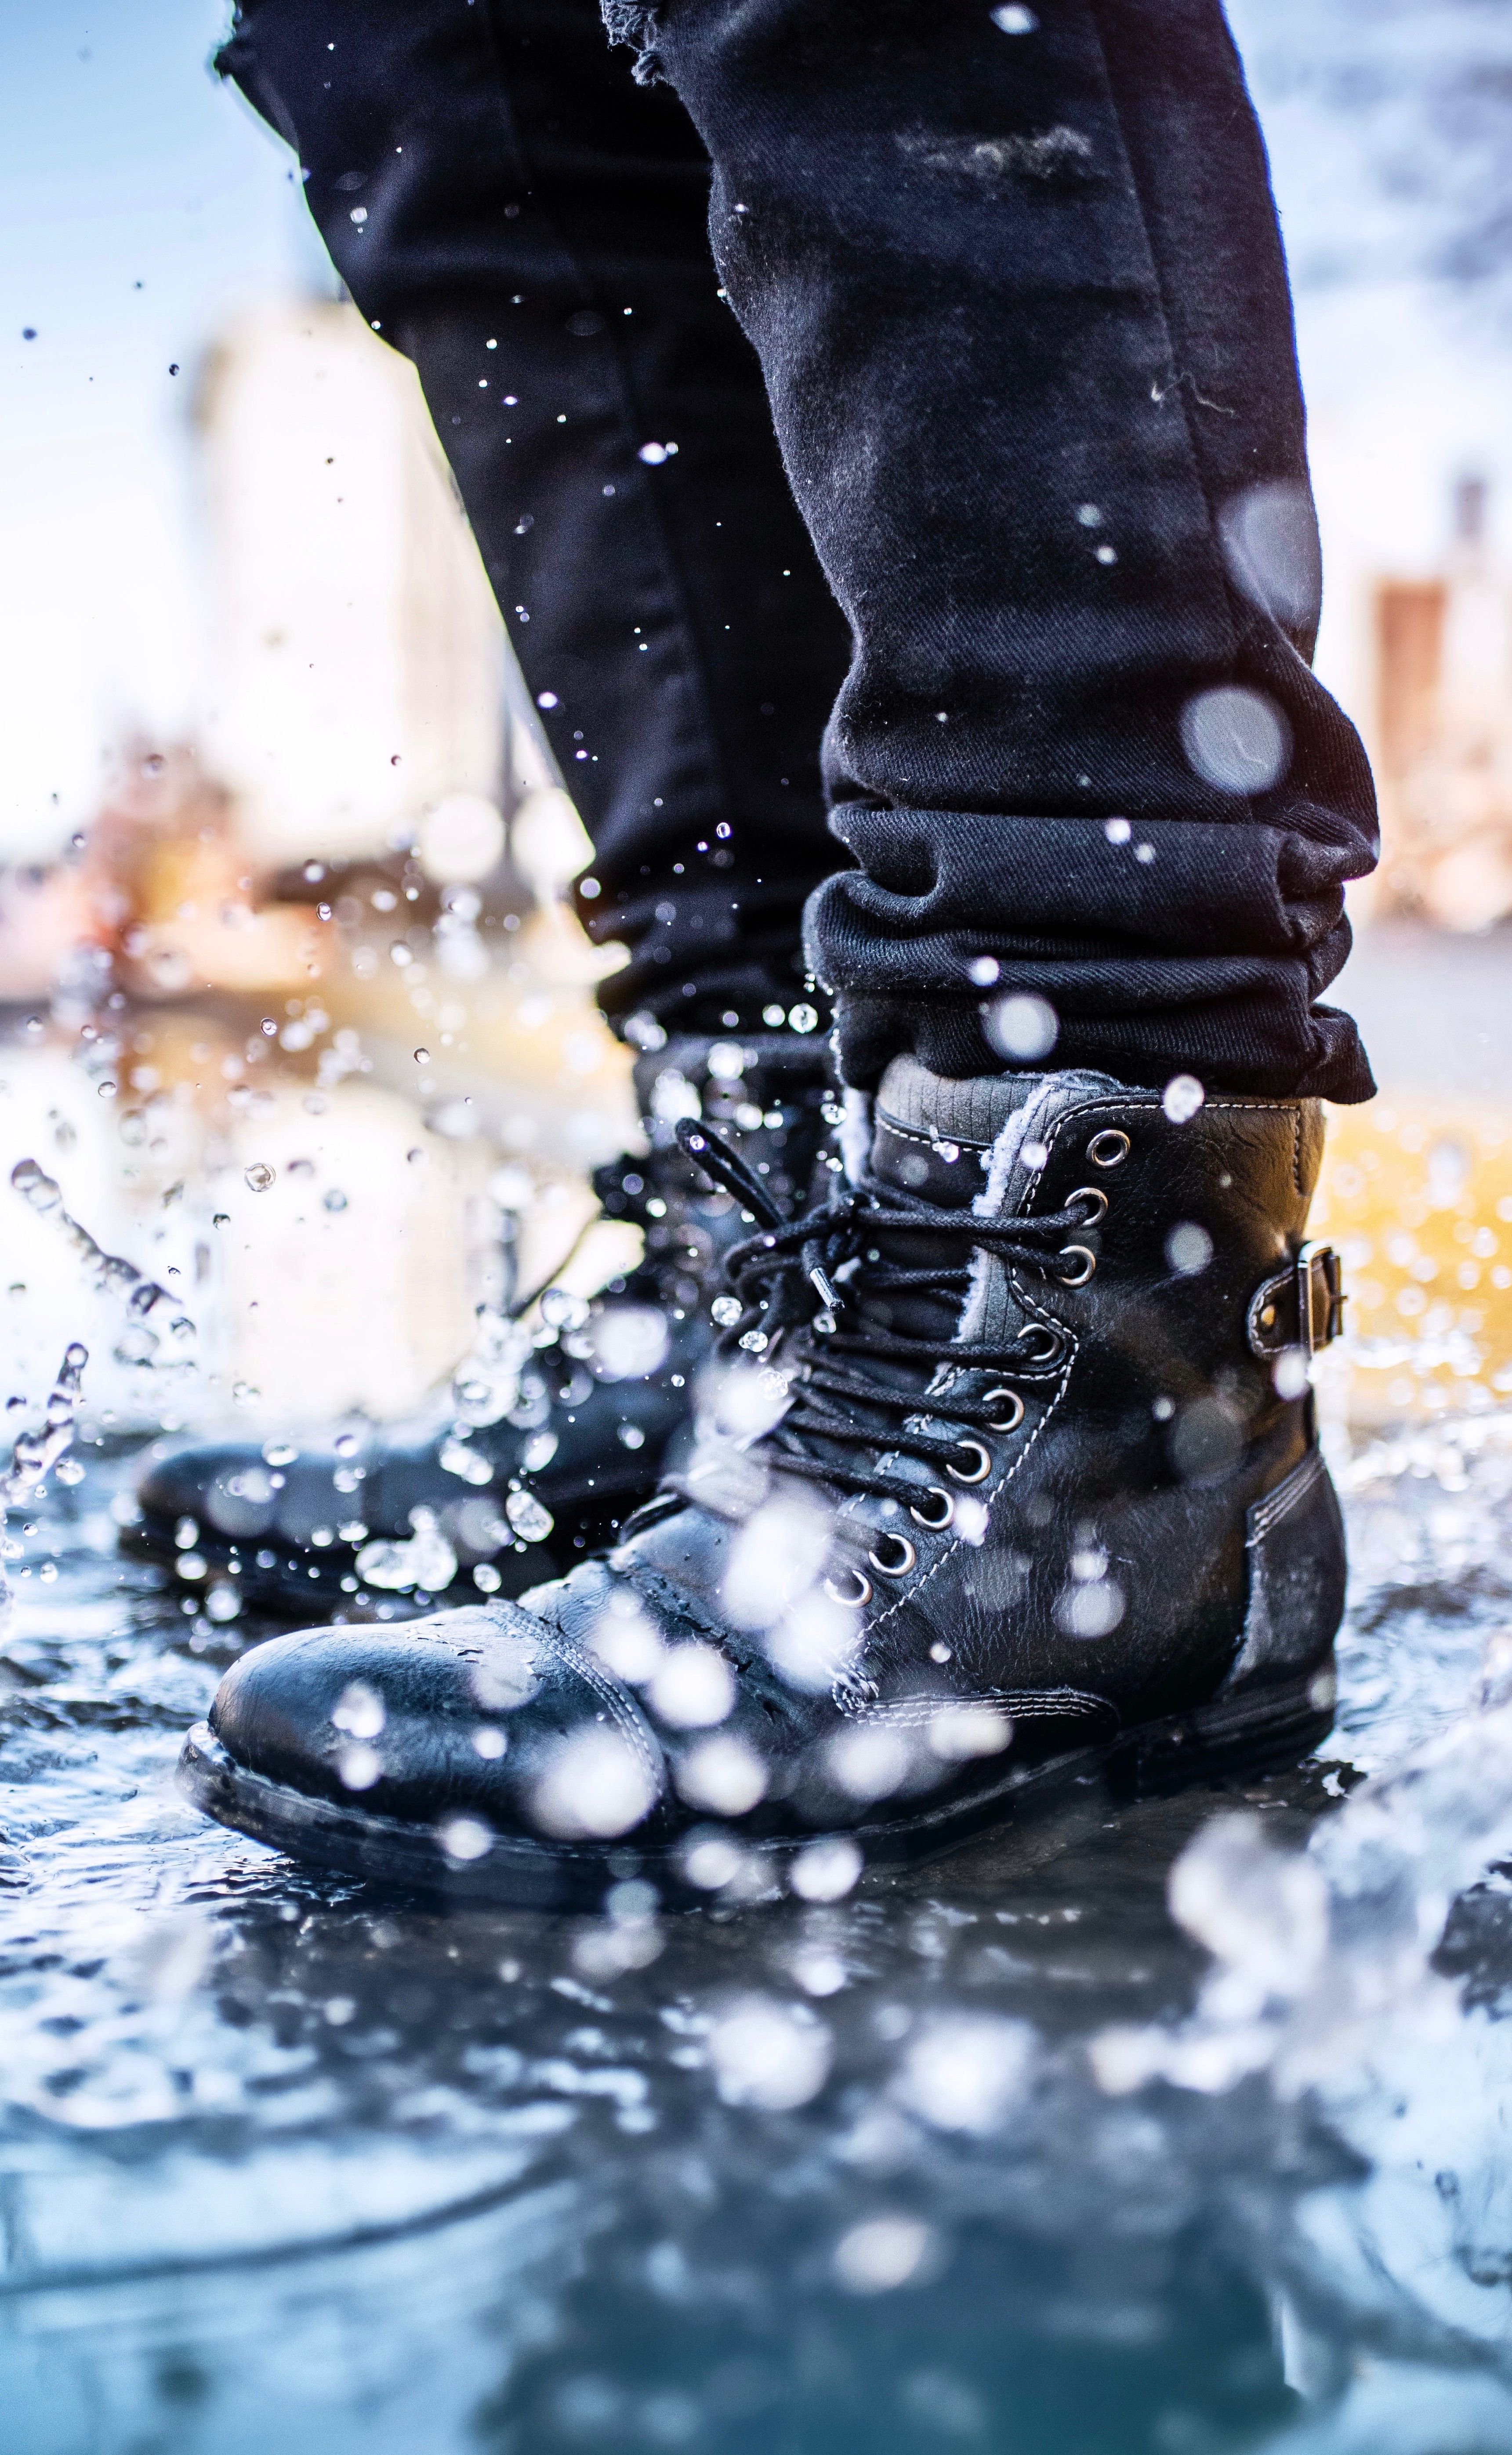 spray, water, miscellanea, miscellaneous, legs, boots, puddle, shoes UHD